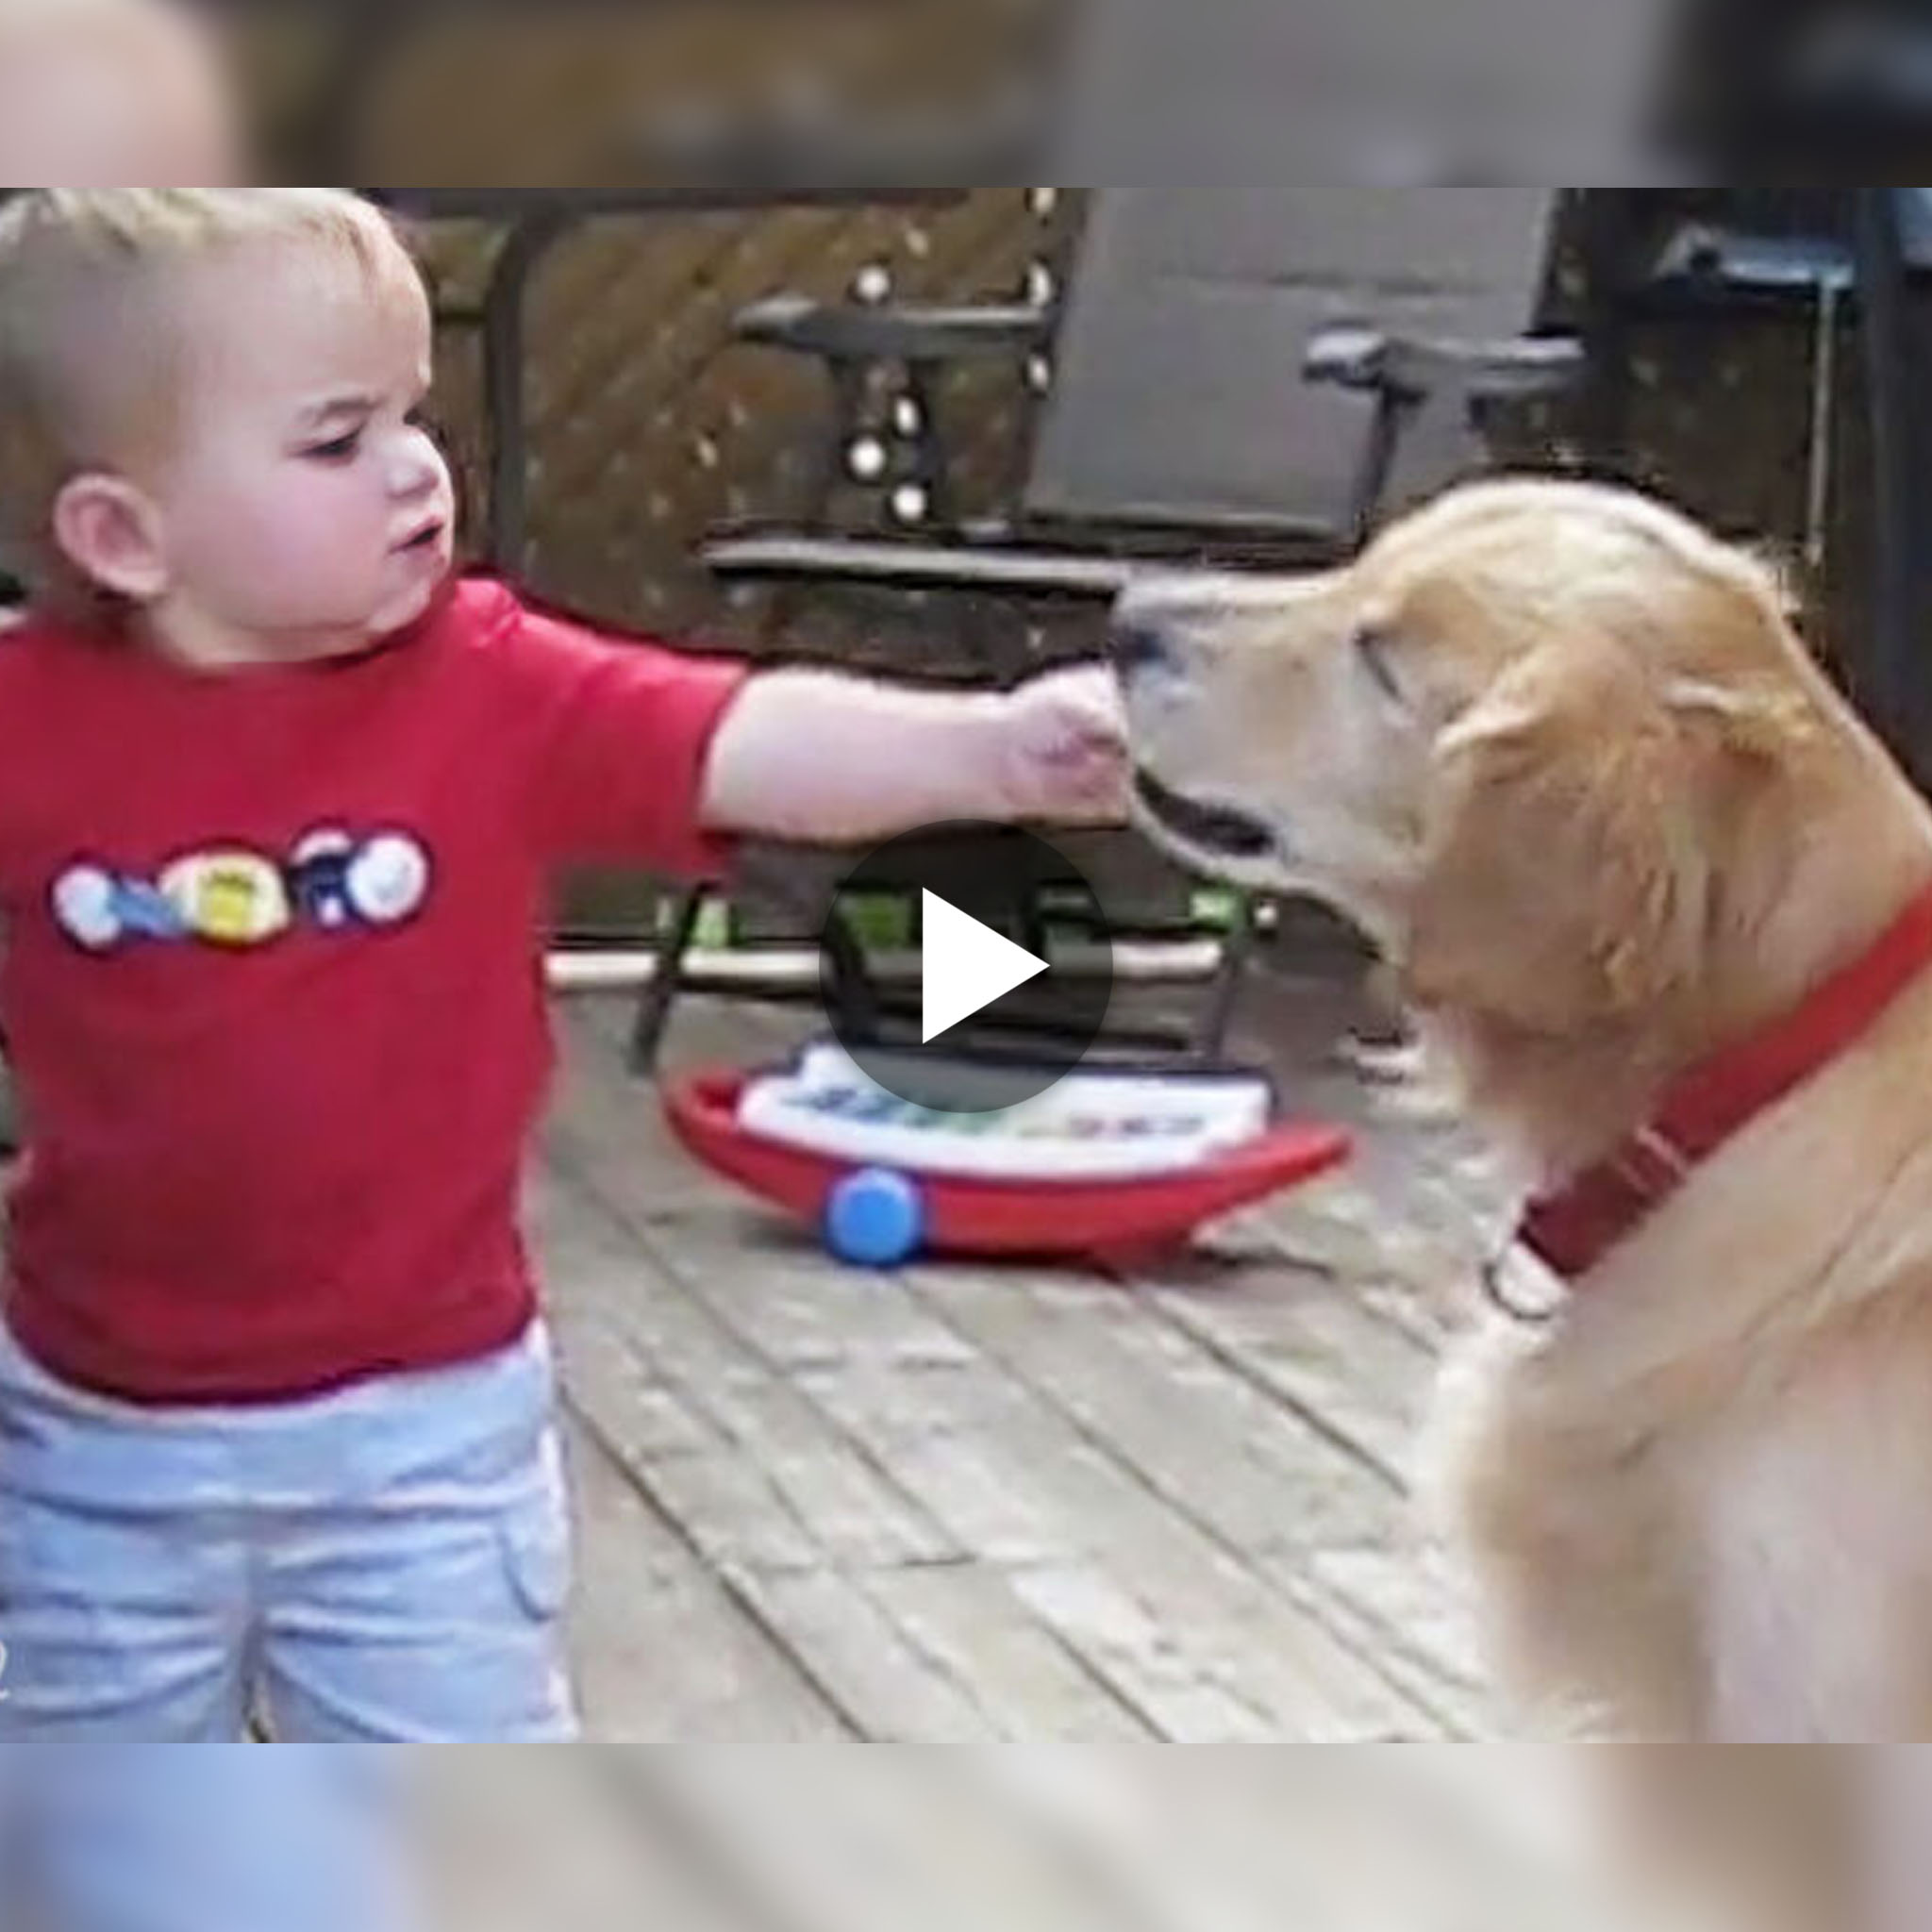 Acts of Kindness: Young Boy Spreads Love by Sharing a Snack with His Blind Dog, Creating a Heartwarming Moment.(Video)